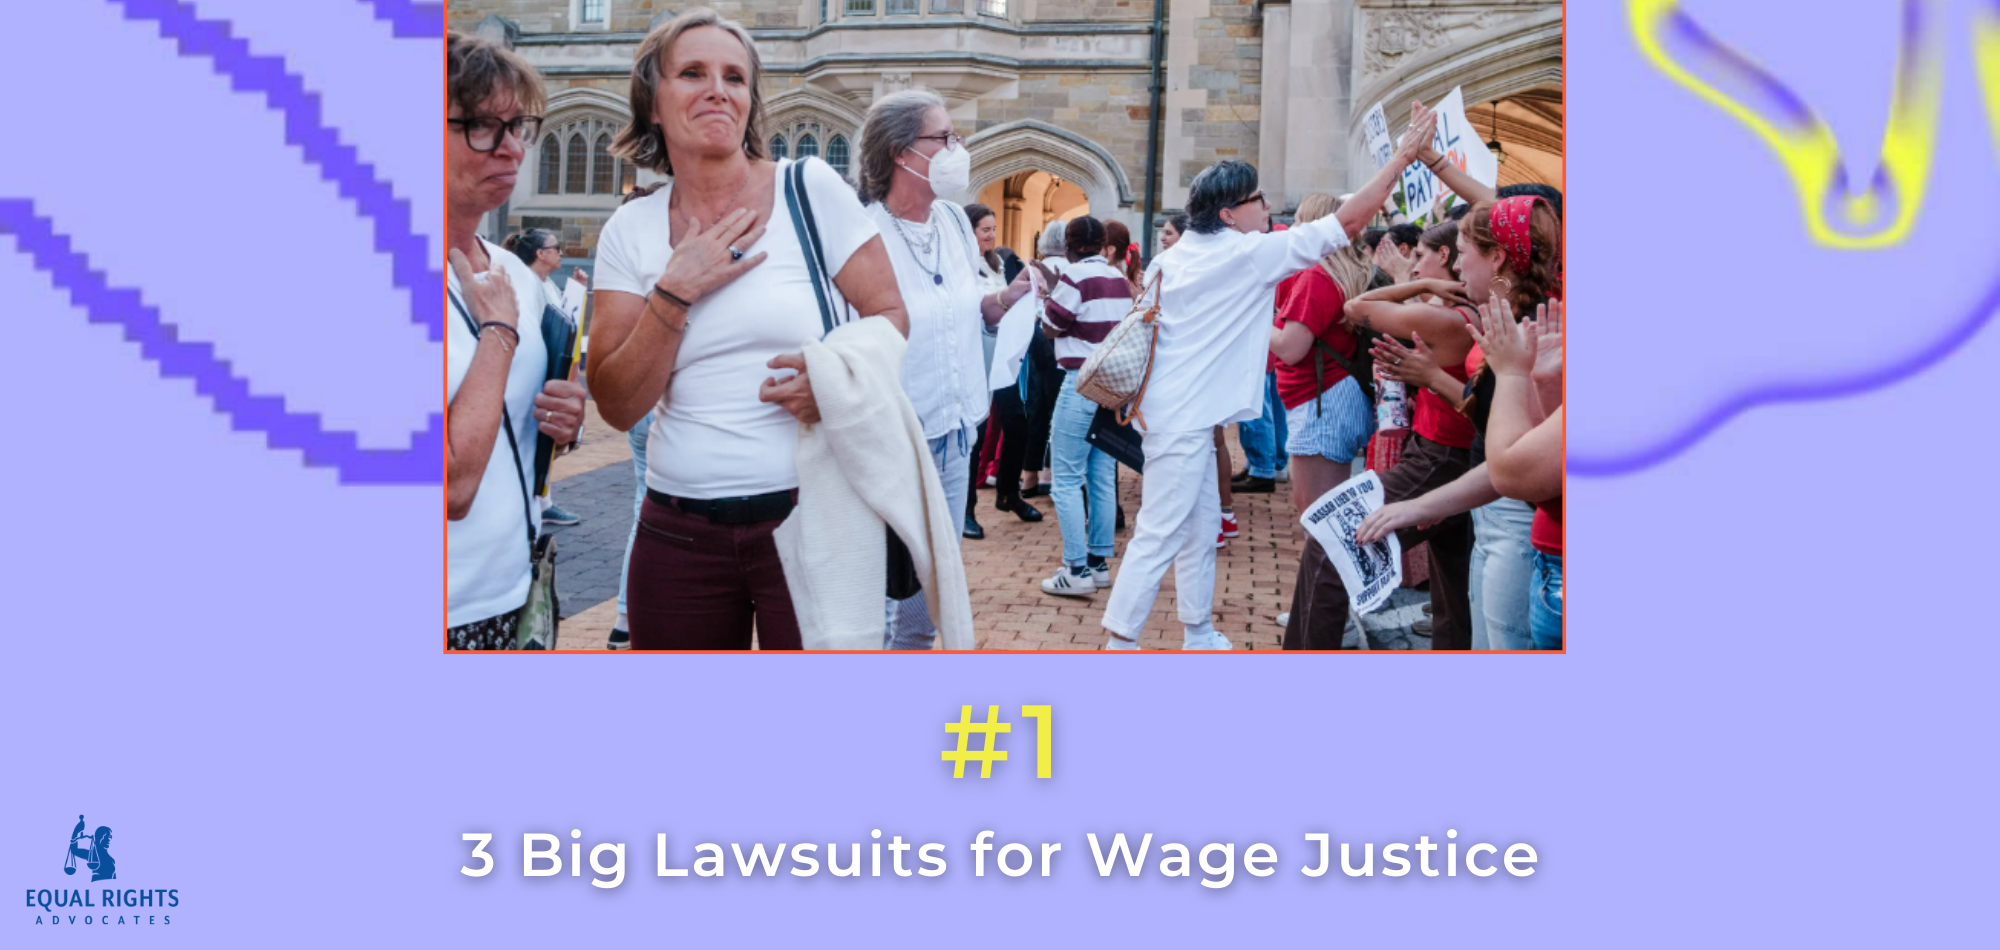 A light purple image with swirling designs. At the top, a photo of women professors at Vassar University looking touched and high fiving students who showed up in protest to support the women professors' equal pay lawsuit. Underneath, text: #1 Big Lawsuits for Wage Justice